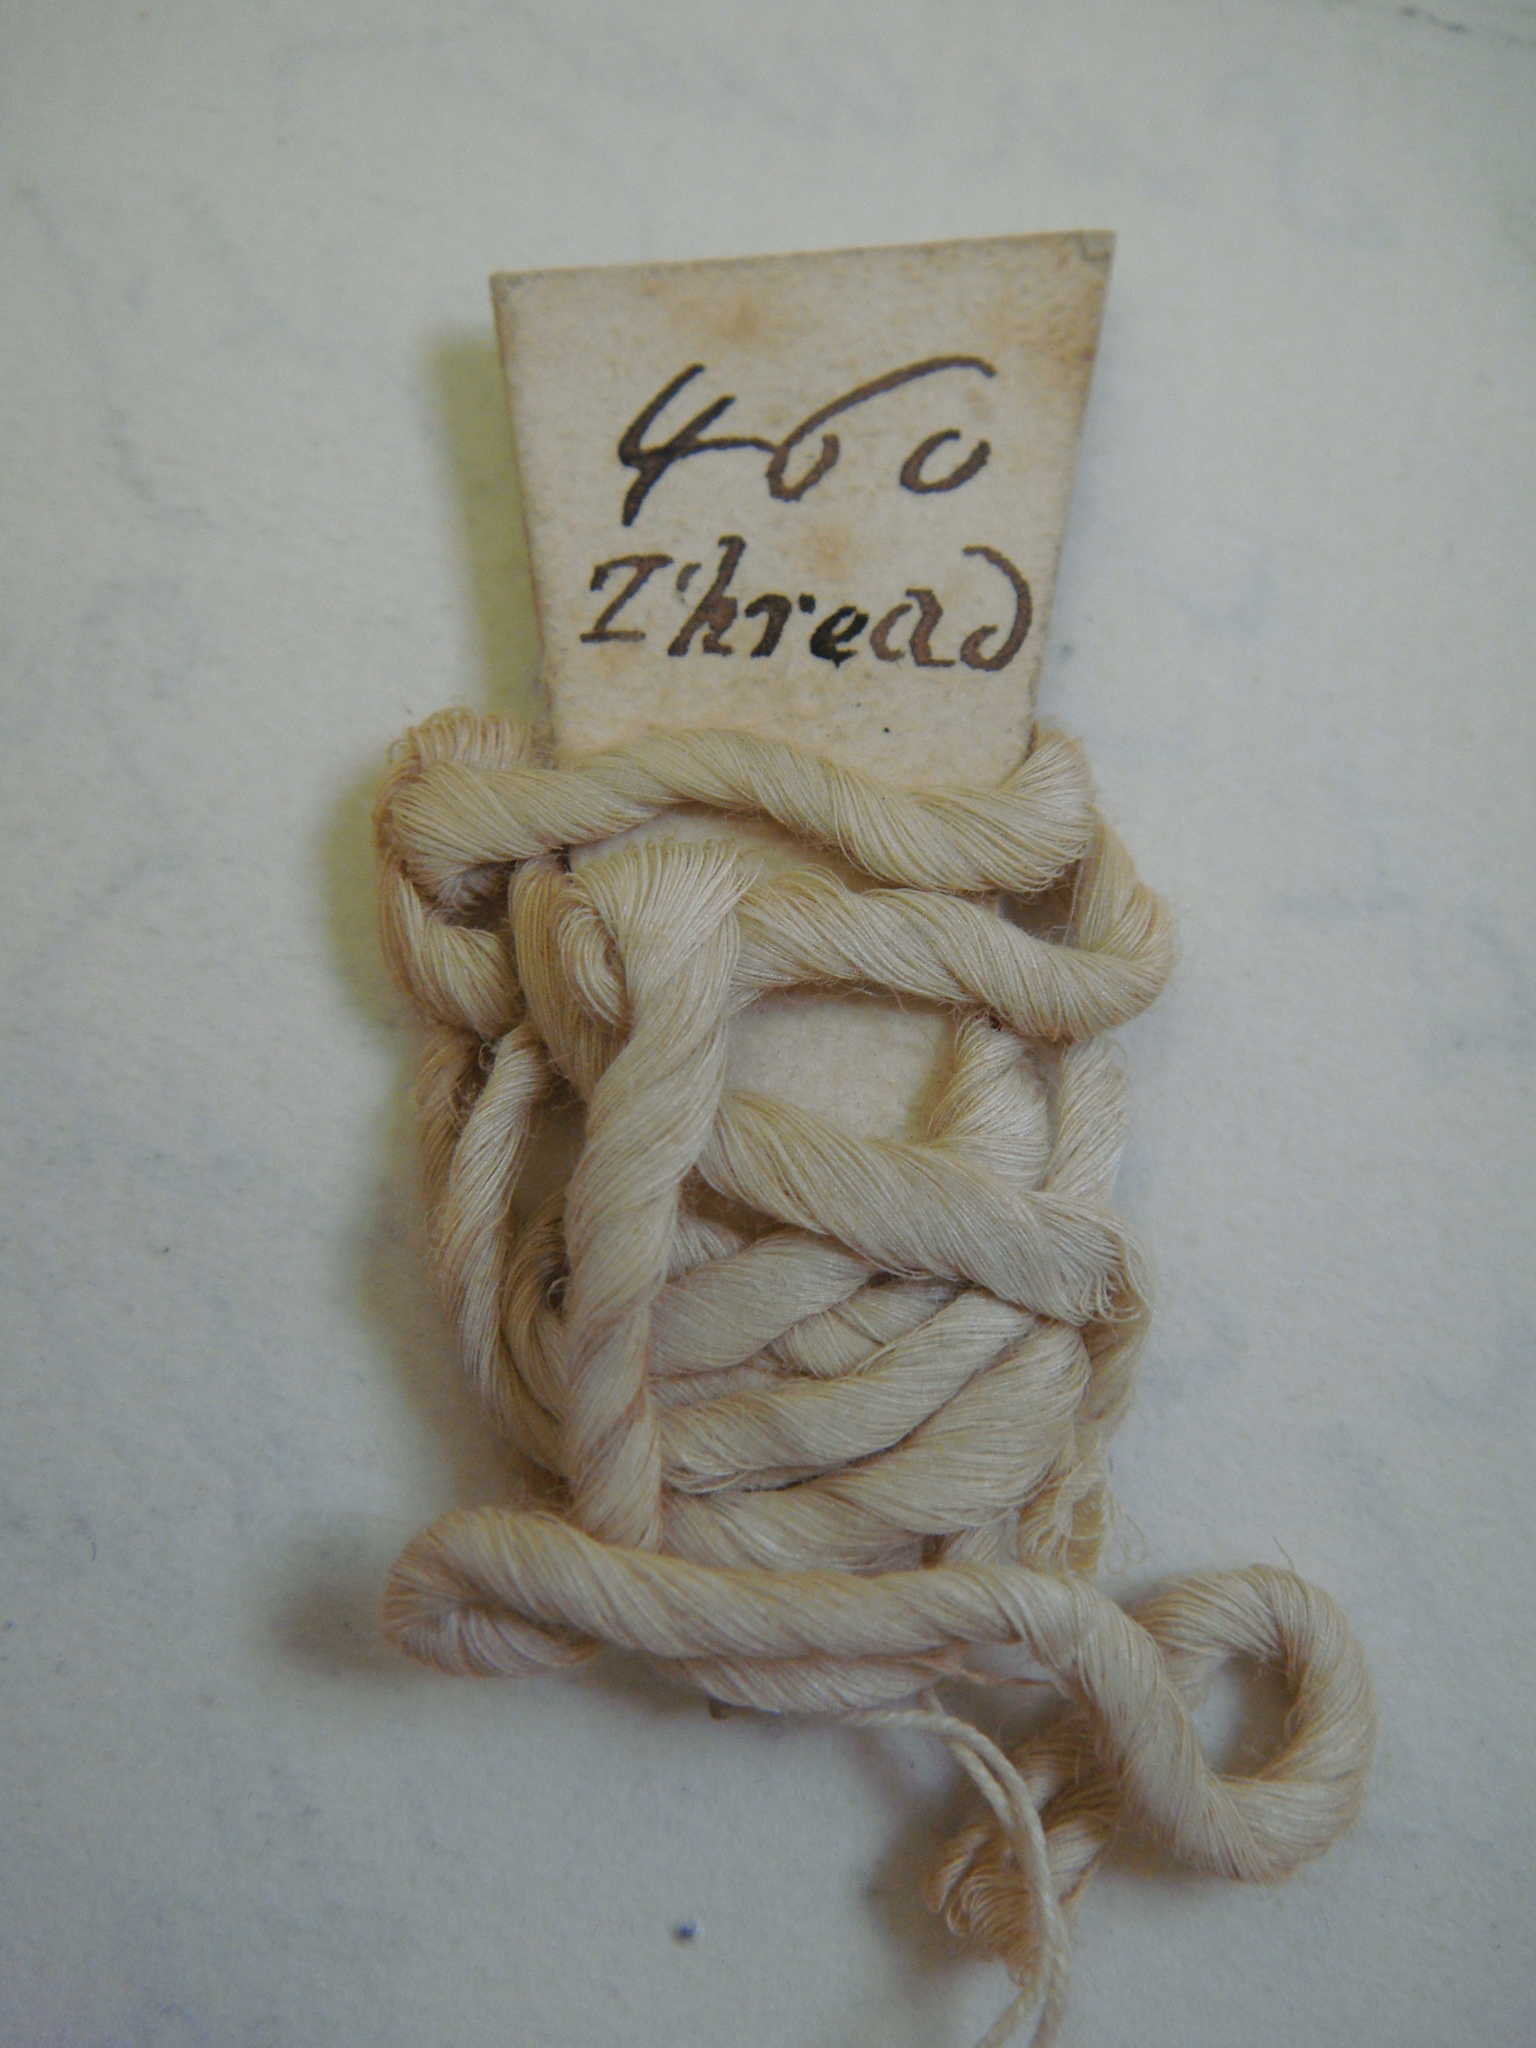 One of the threads found in Mary's letters